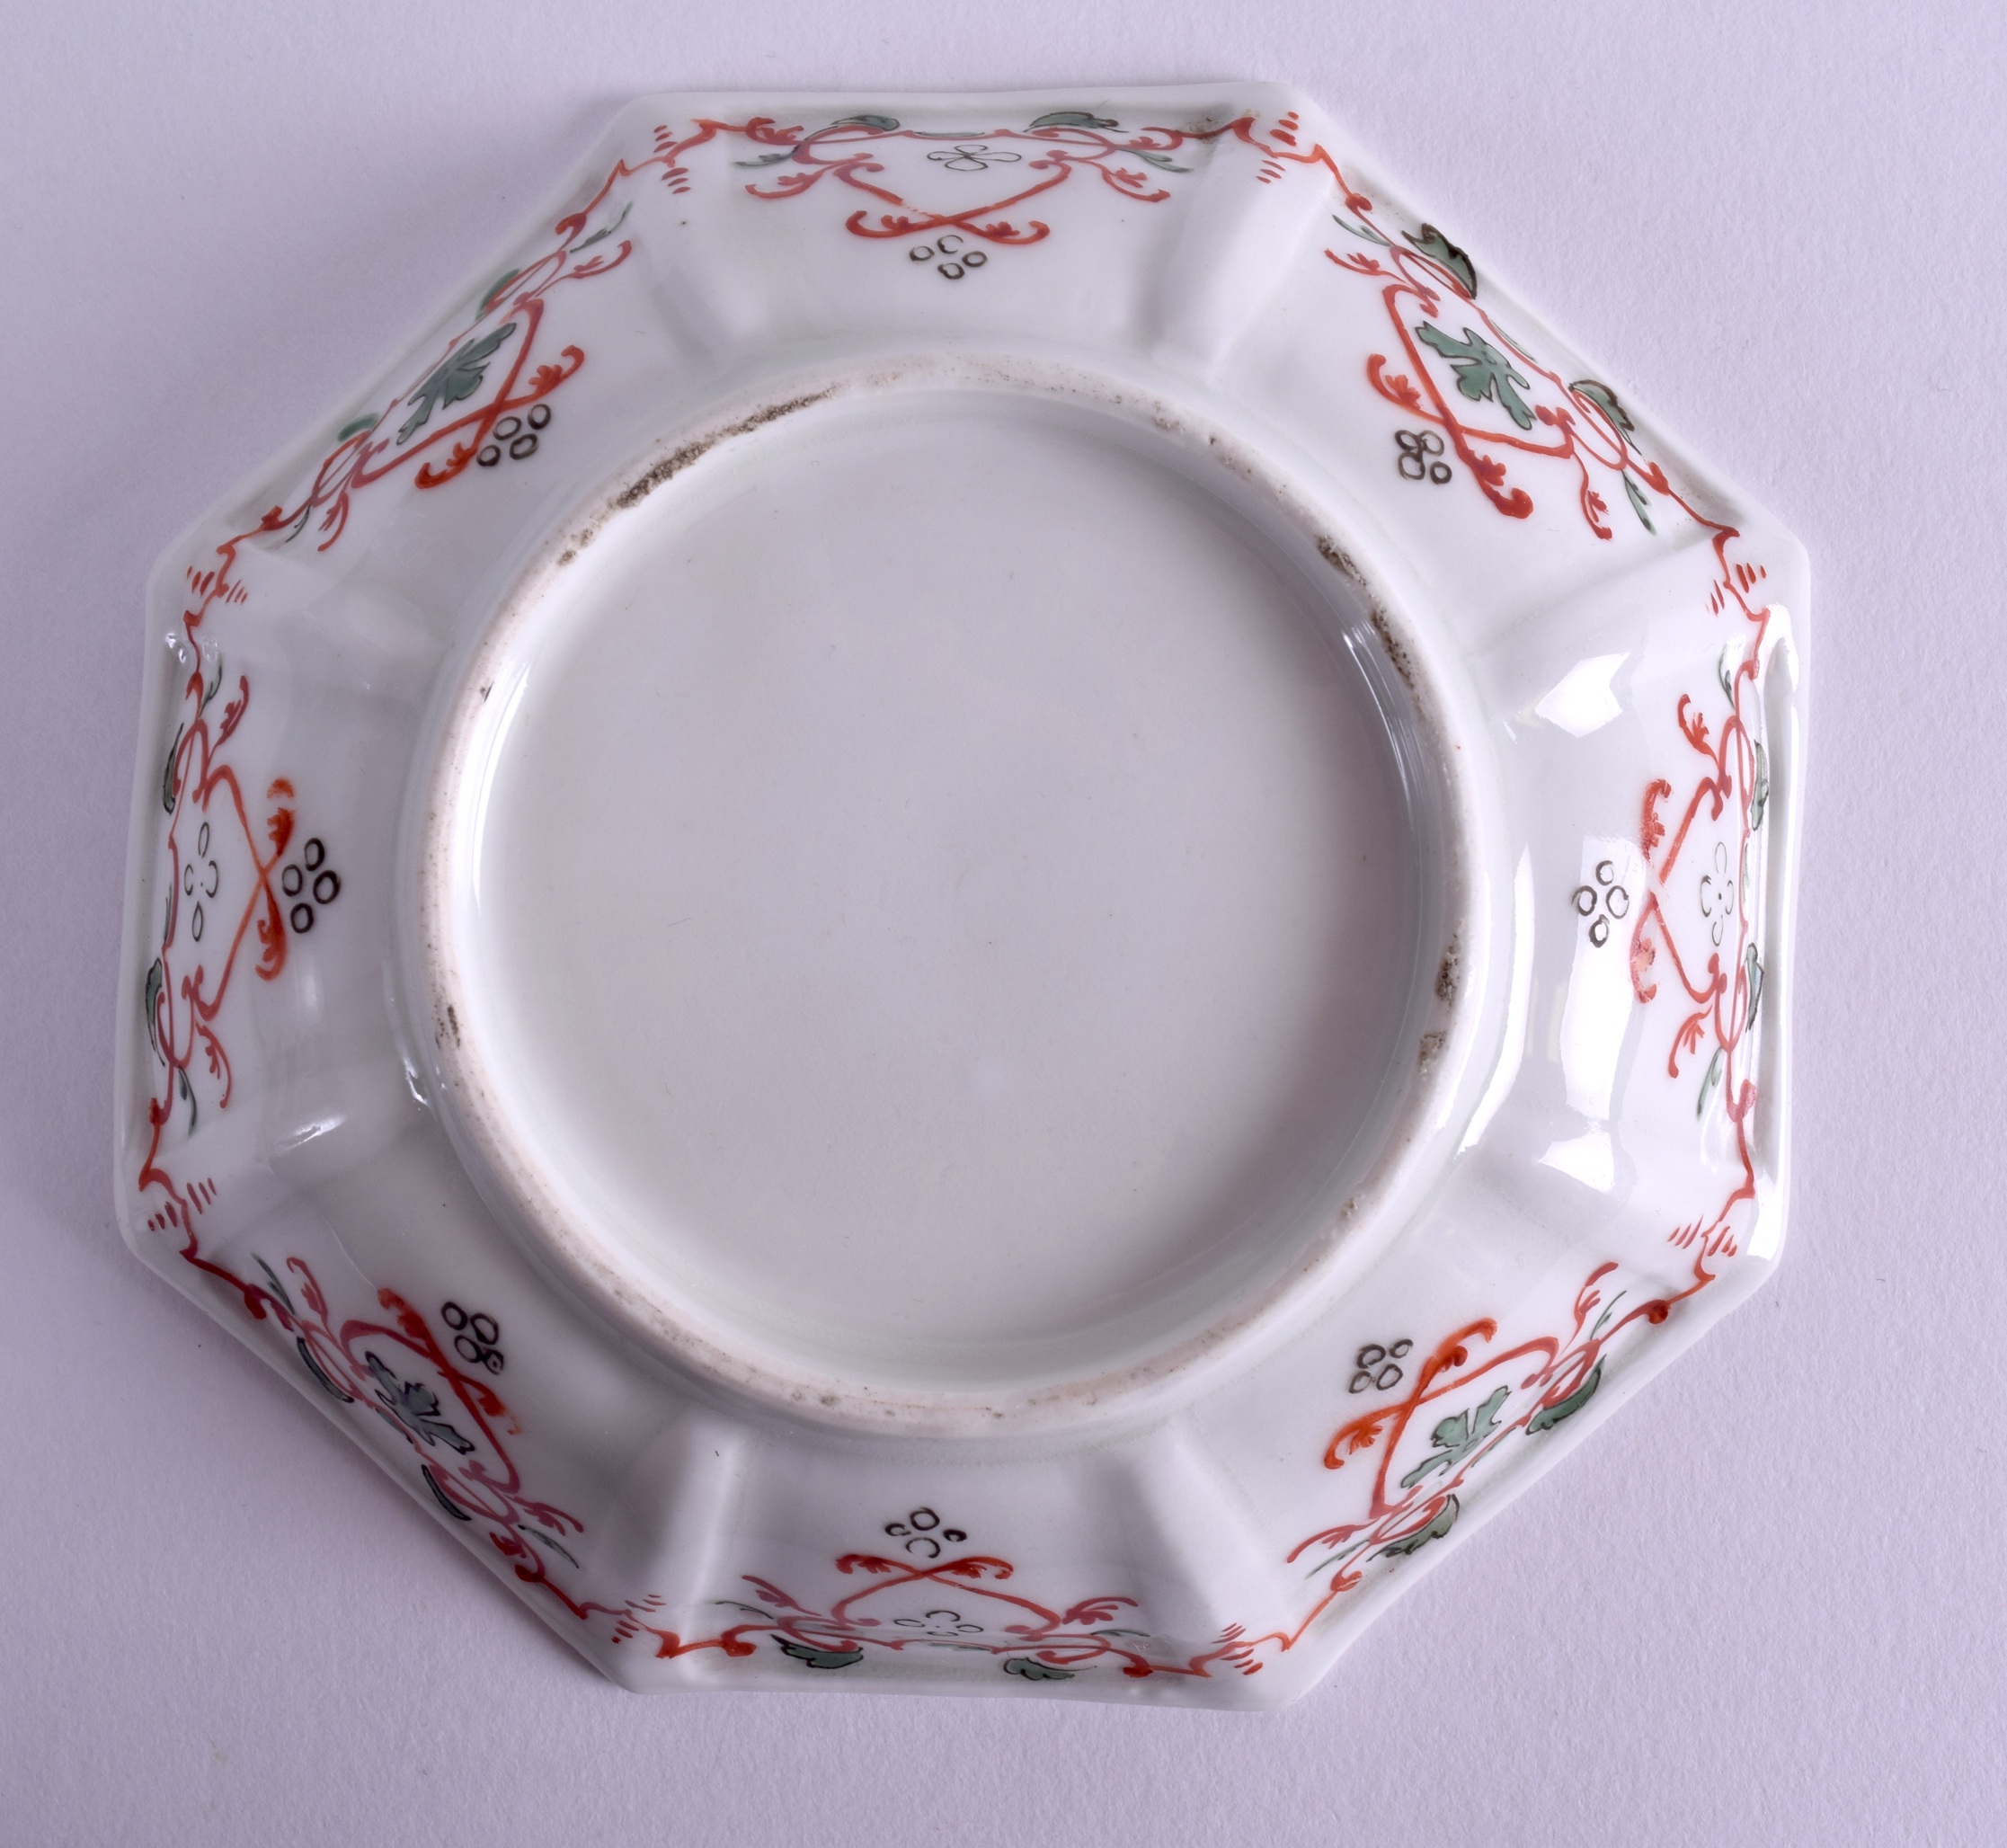 AN 18TH CENTURY EUROPEAN KAKIEMON OCTAGONAL PORCELAIN DISH possibly Vienna or Meissen, painted - Image 2 of 2